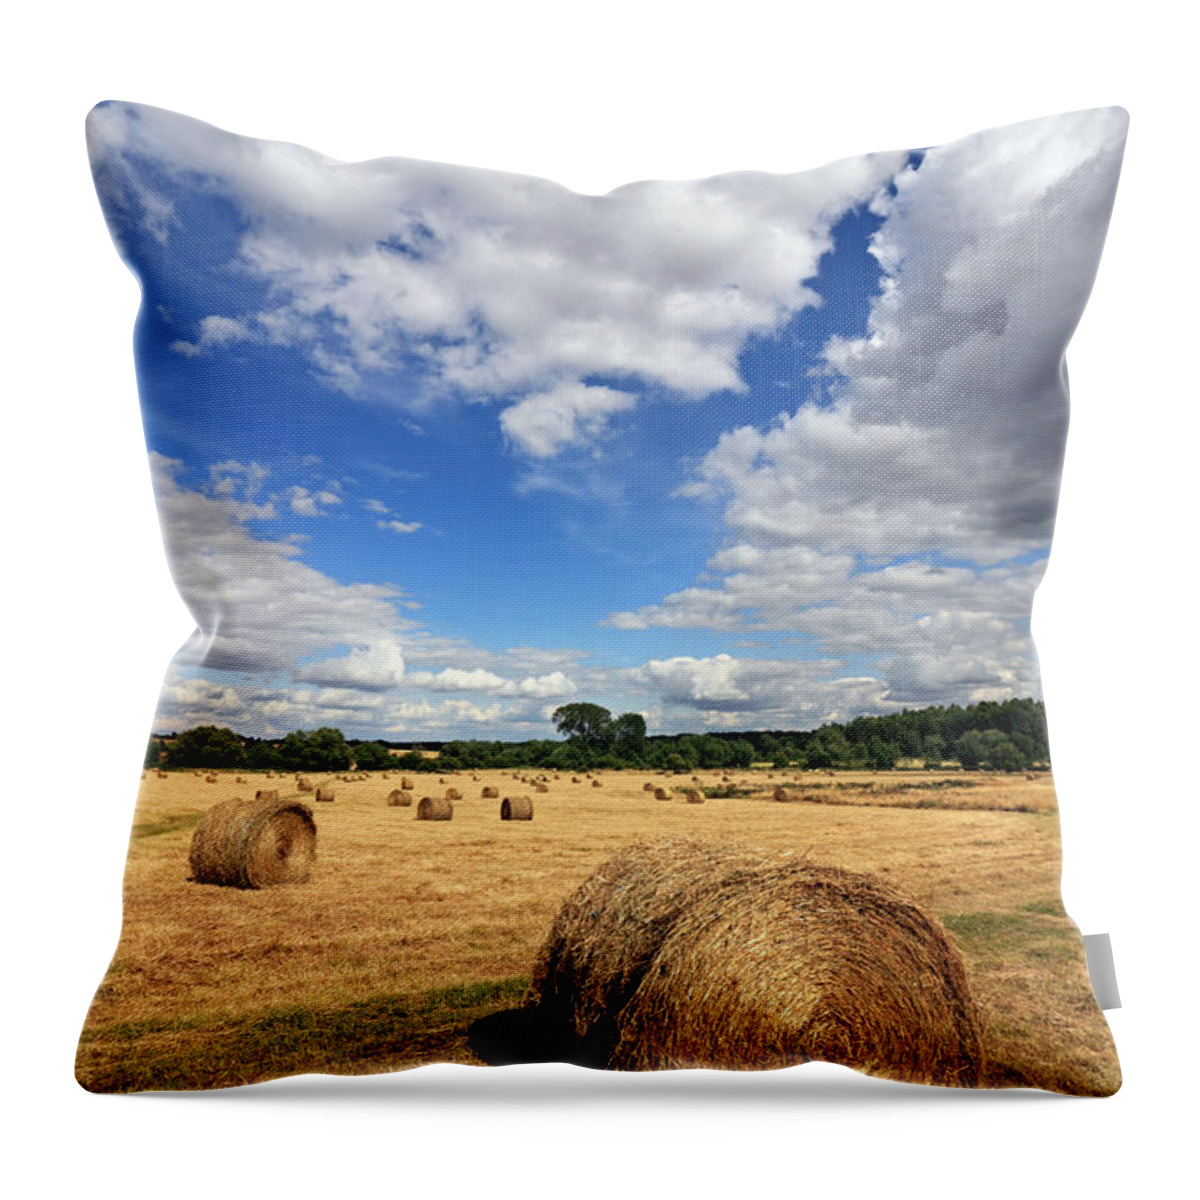 Summer Bale Bales Of Hay In The English Countryside At Minster Lovell Oxfordshire England Uk Britain British Field Landscape Summer Scene Idyllic Tranquil Scenic Round Circular Cotswolds Fluffy Clouds Blue Sky Throw Pillow featuring the photograph Bales of Hay in the English Countryside #10 by Julia Gavin